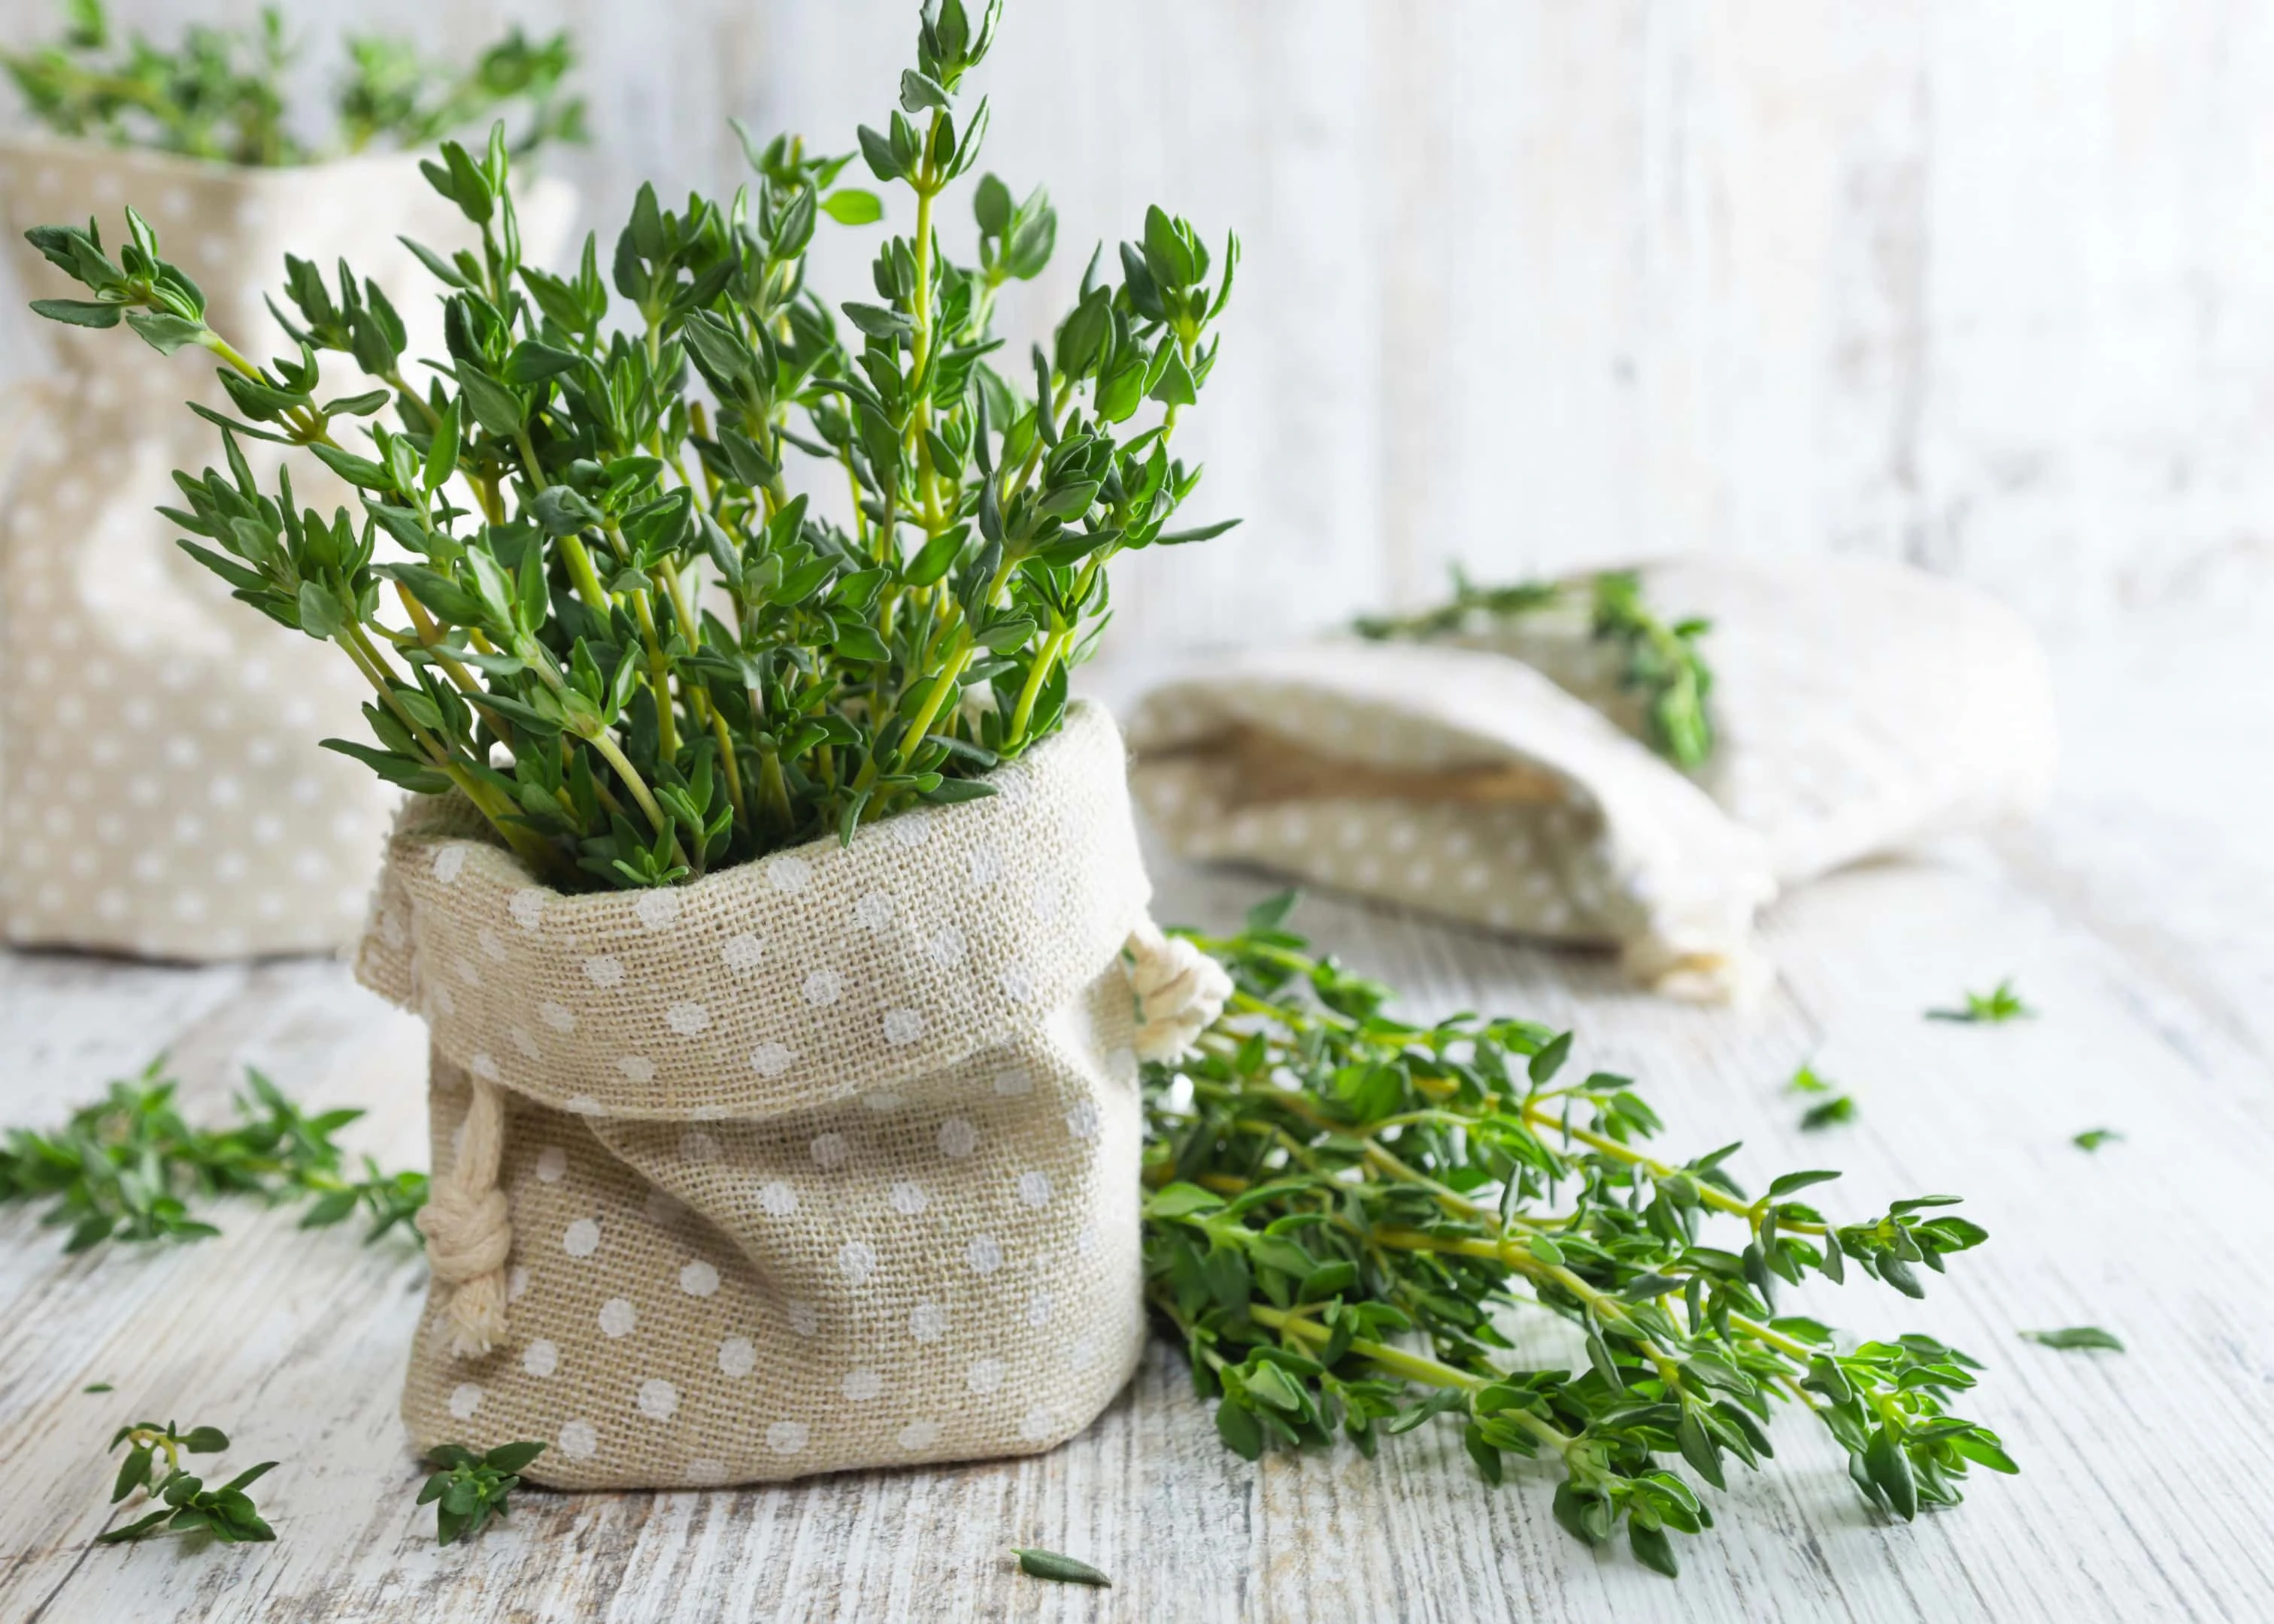 Fresh organic thyme. Thyme is on our list of foods that start with th.